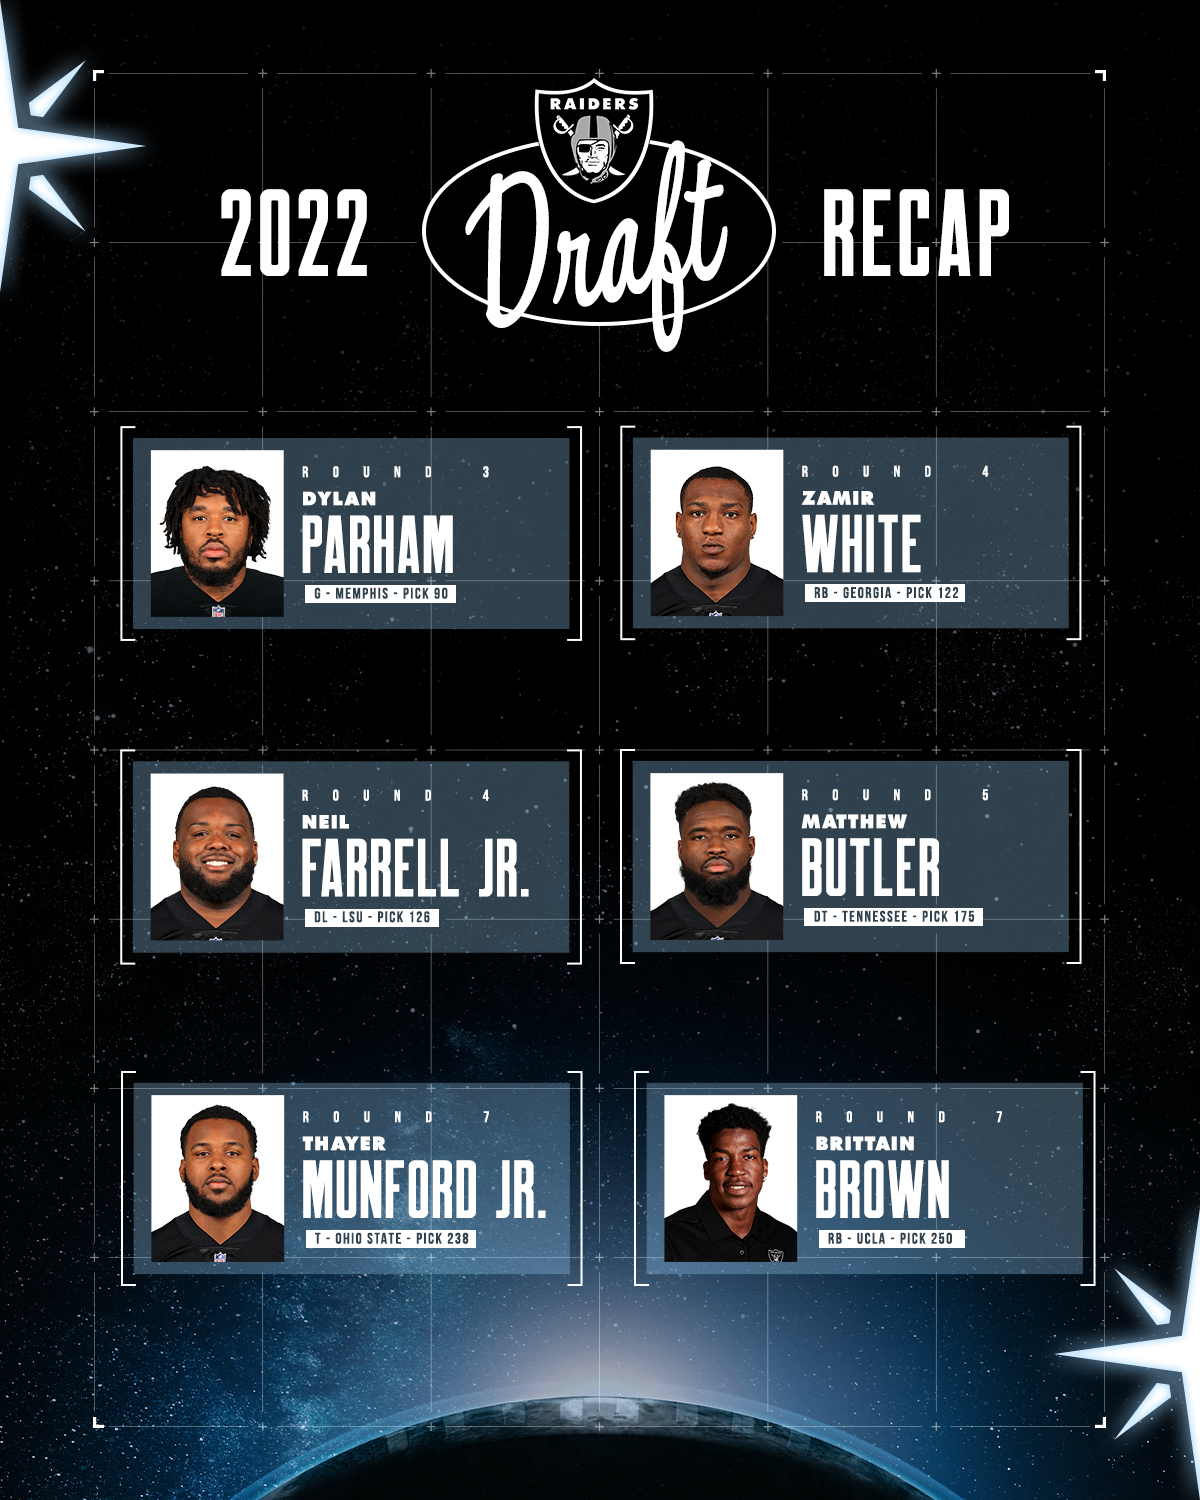 Introducing the Raiders' 2022 NFL Draft Class